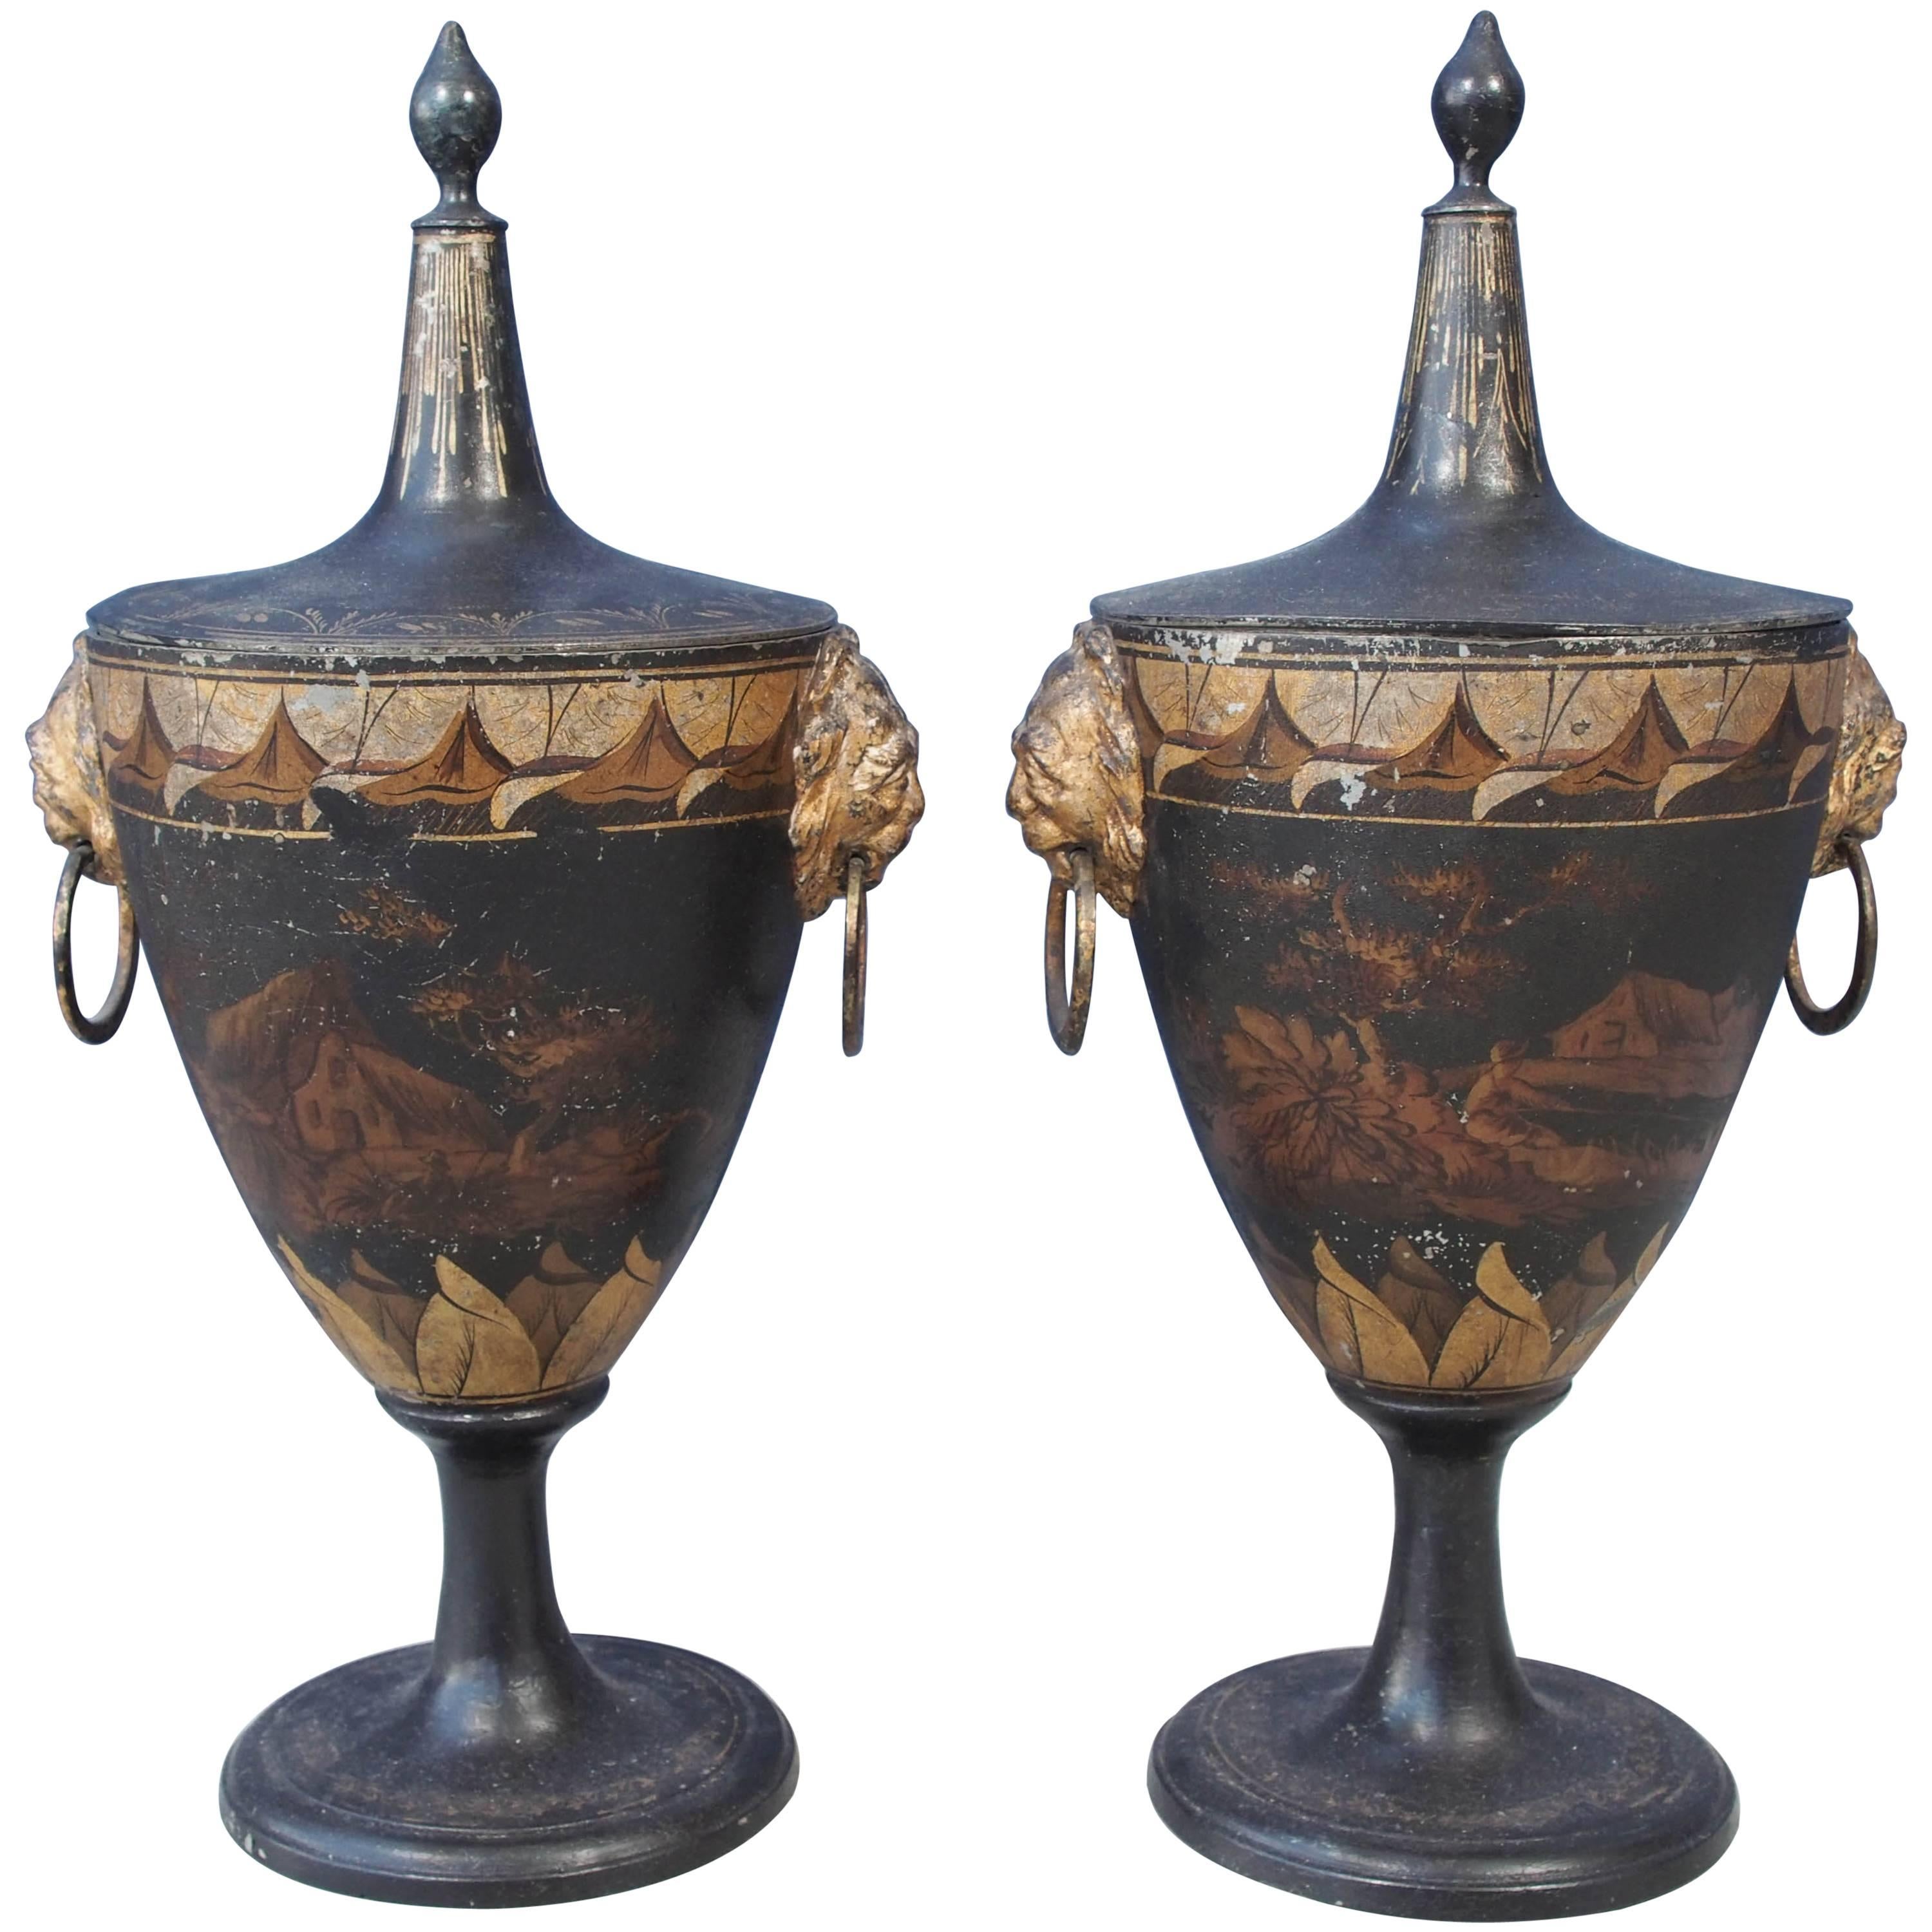 Pair of Tole Painted and Gilt Covered Chestnut Urns For Sale